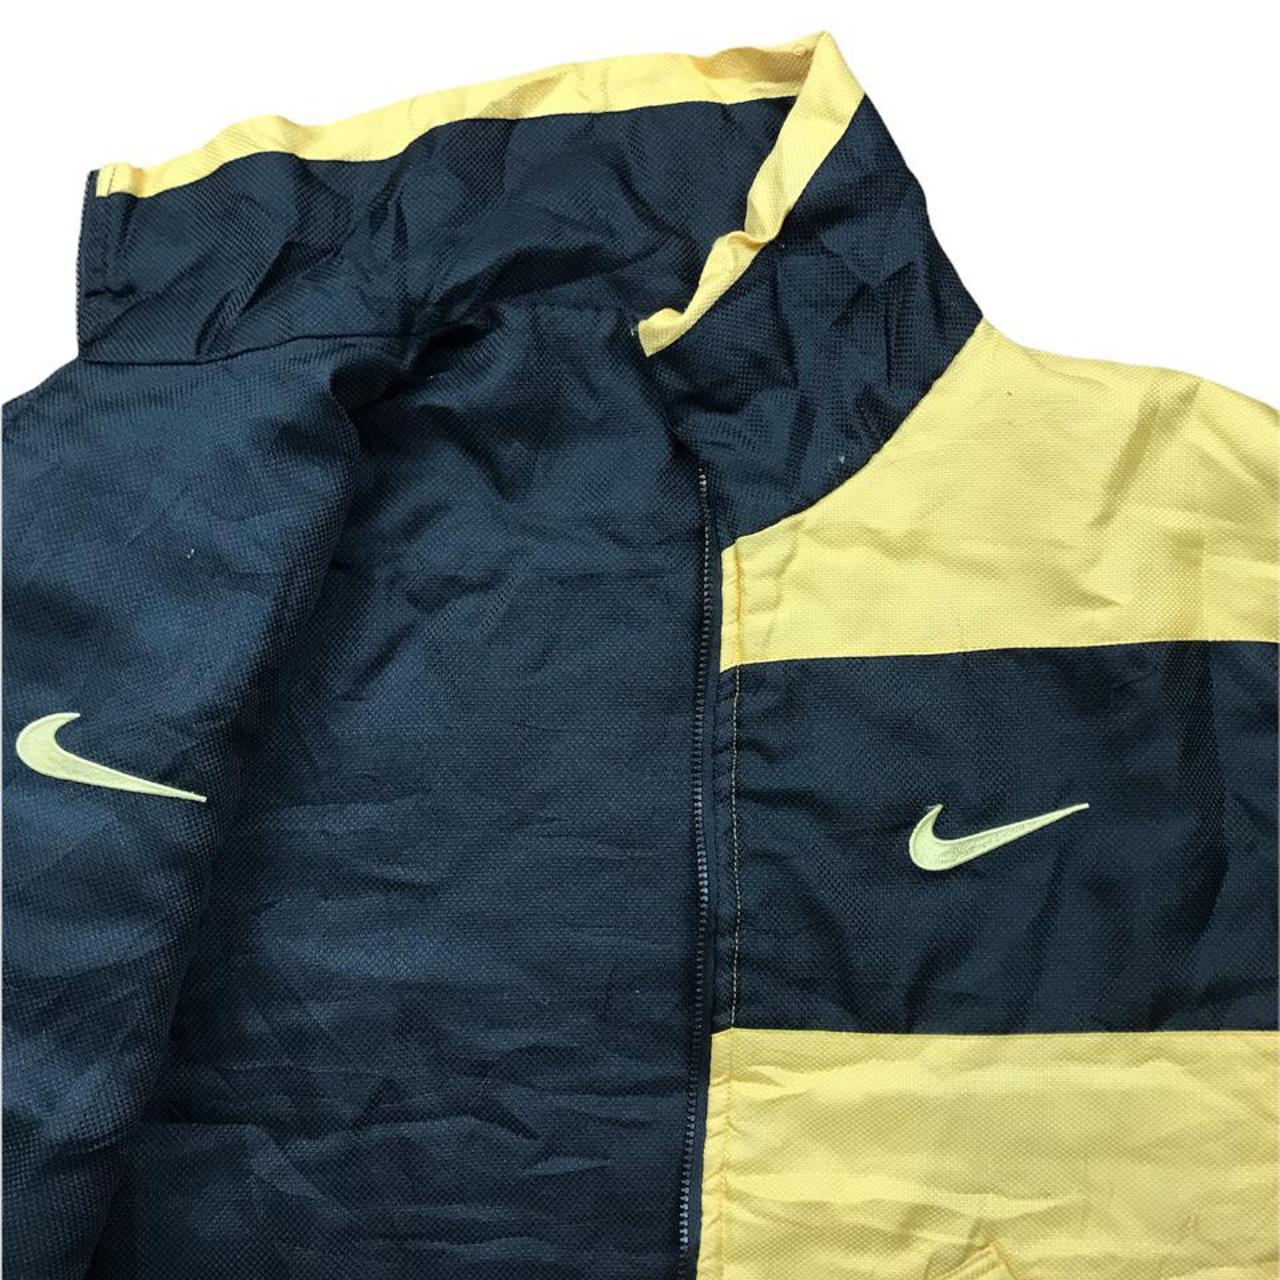 Nike Padded Jacket in Yellow and Black with big... - Depop